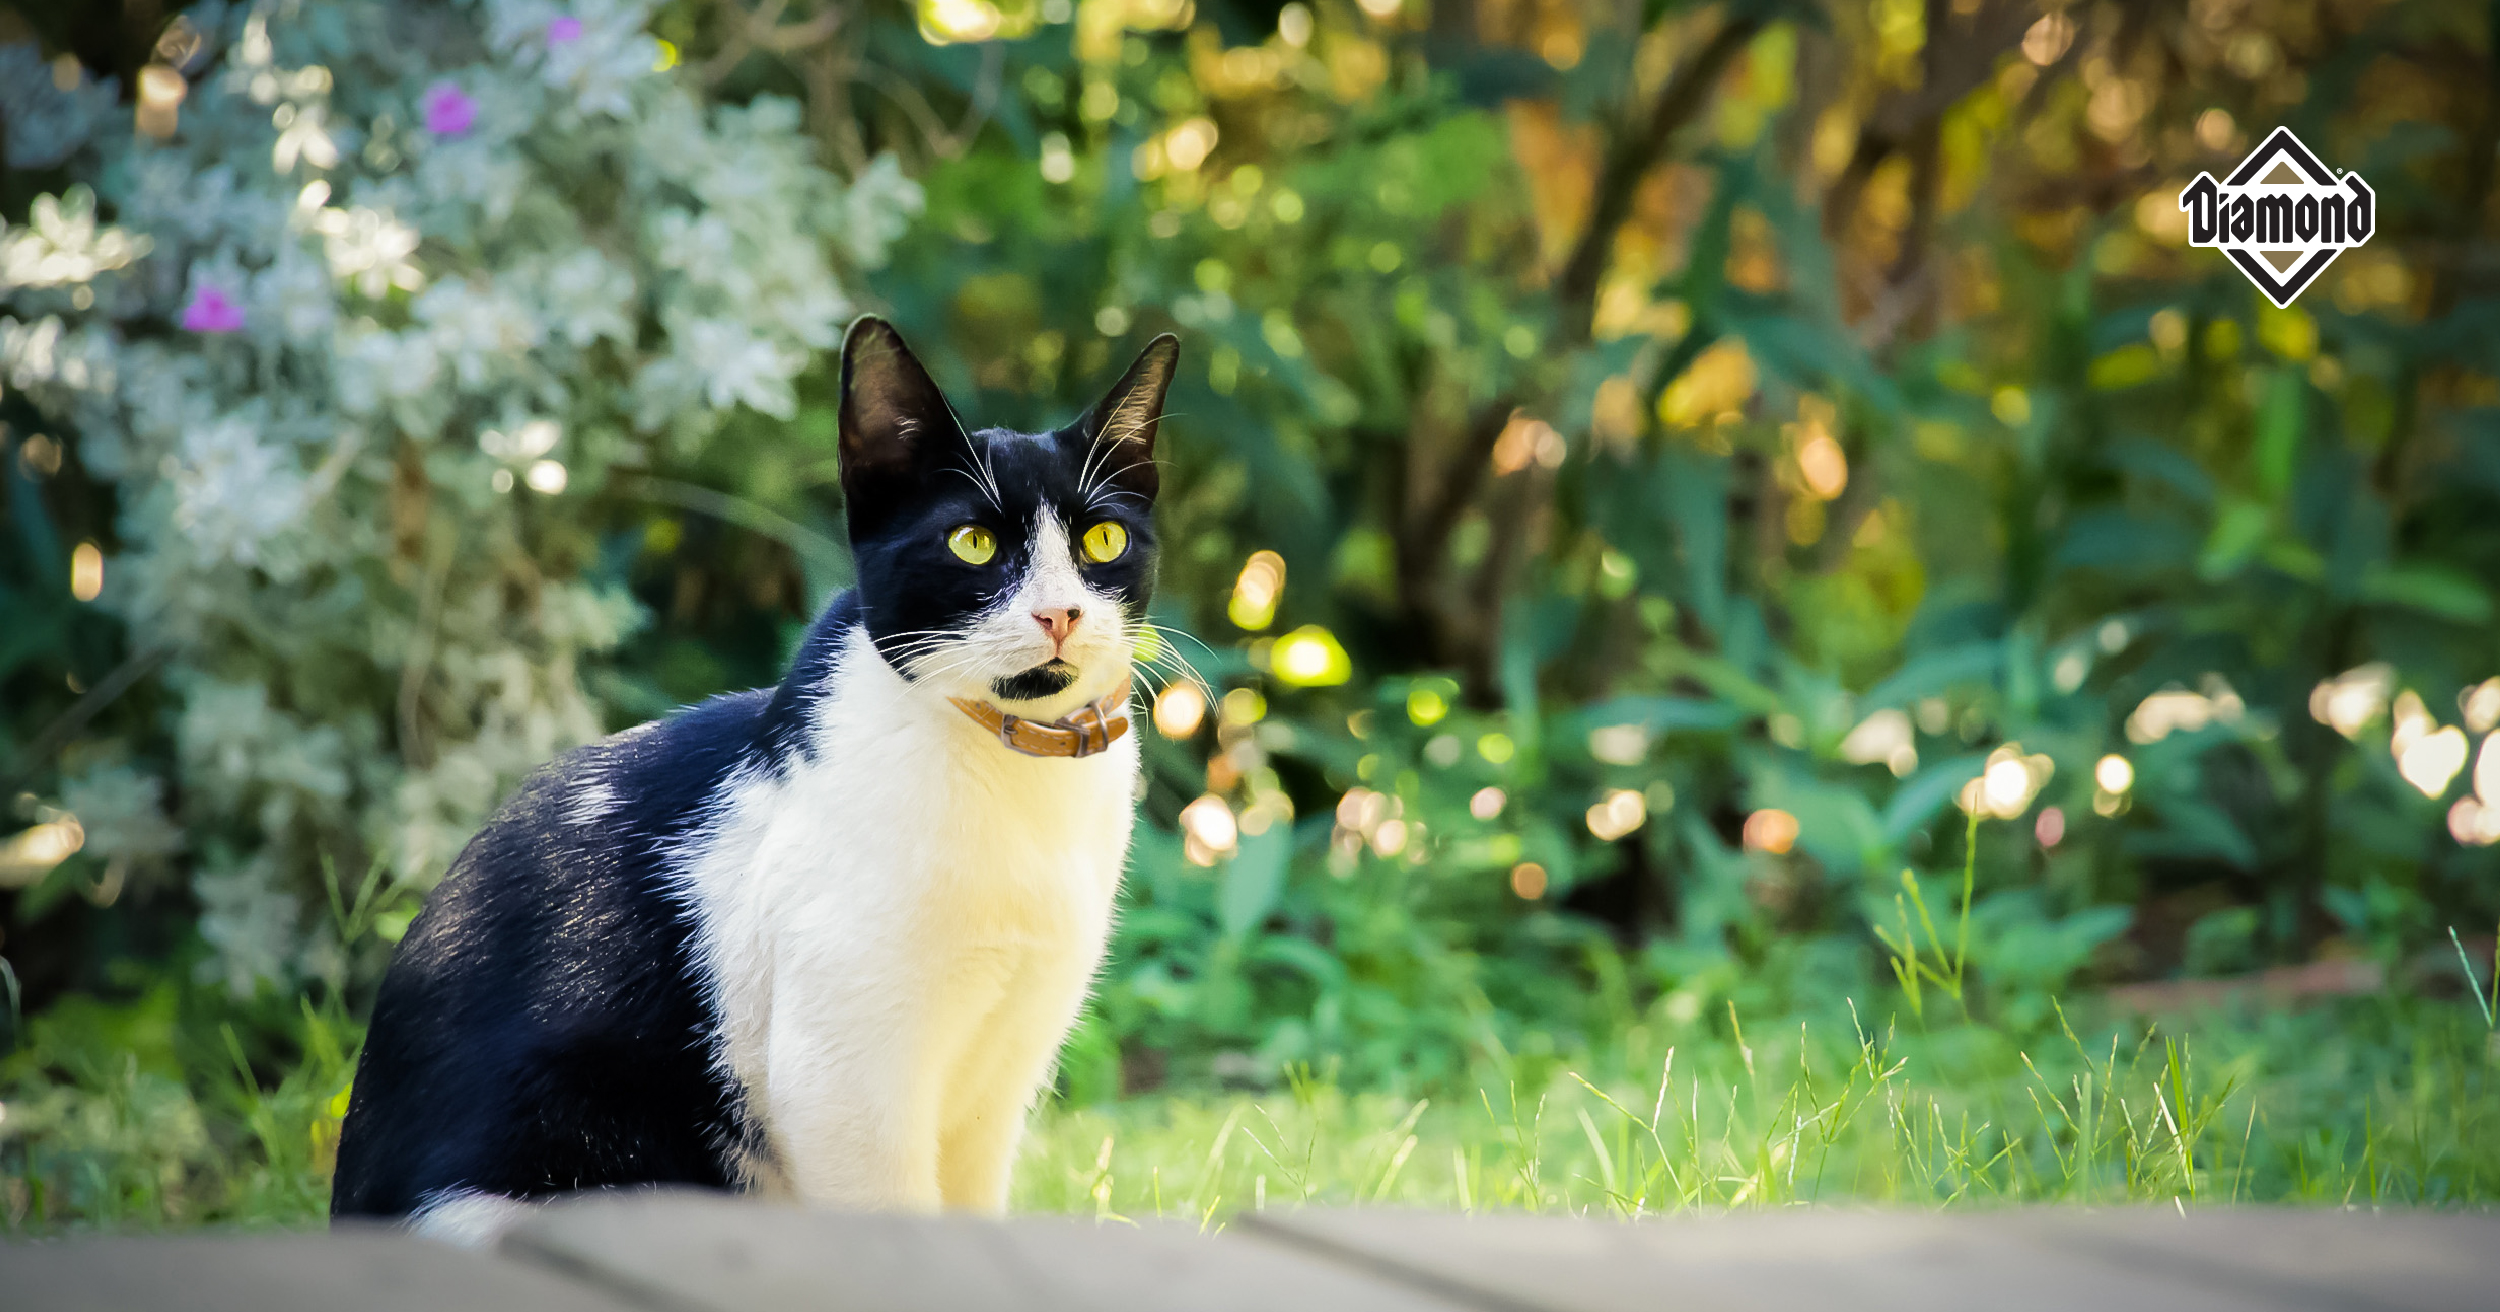 Black and White Cat Sitting Outdoors with Flowers Graphic | Diamond Pet Foods